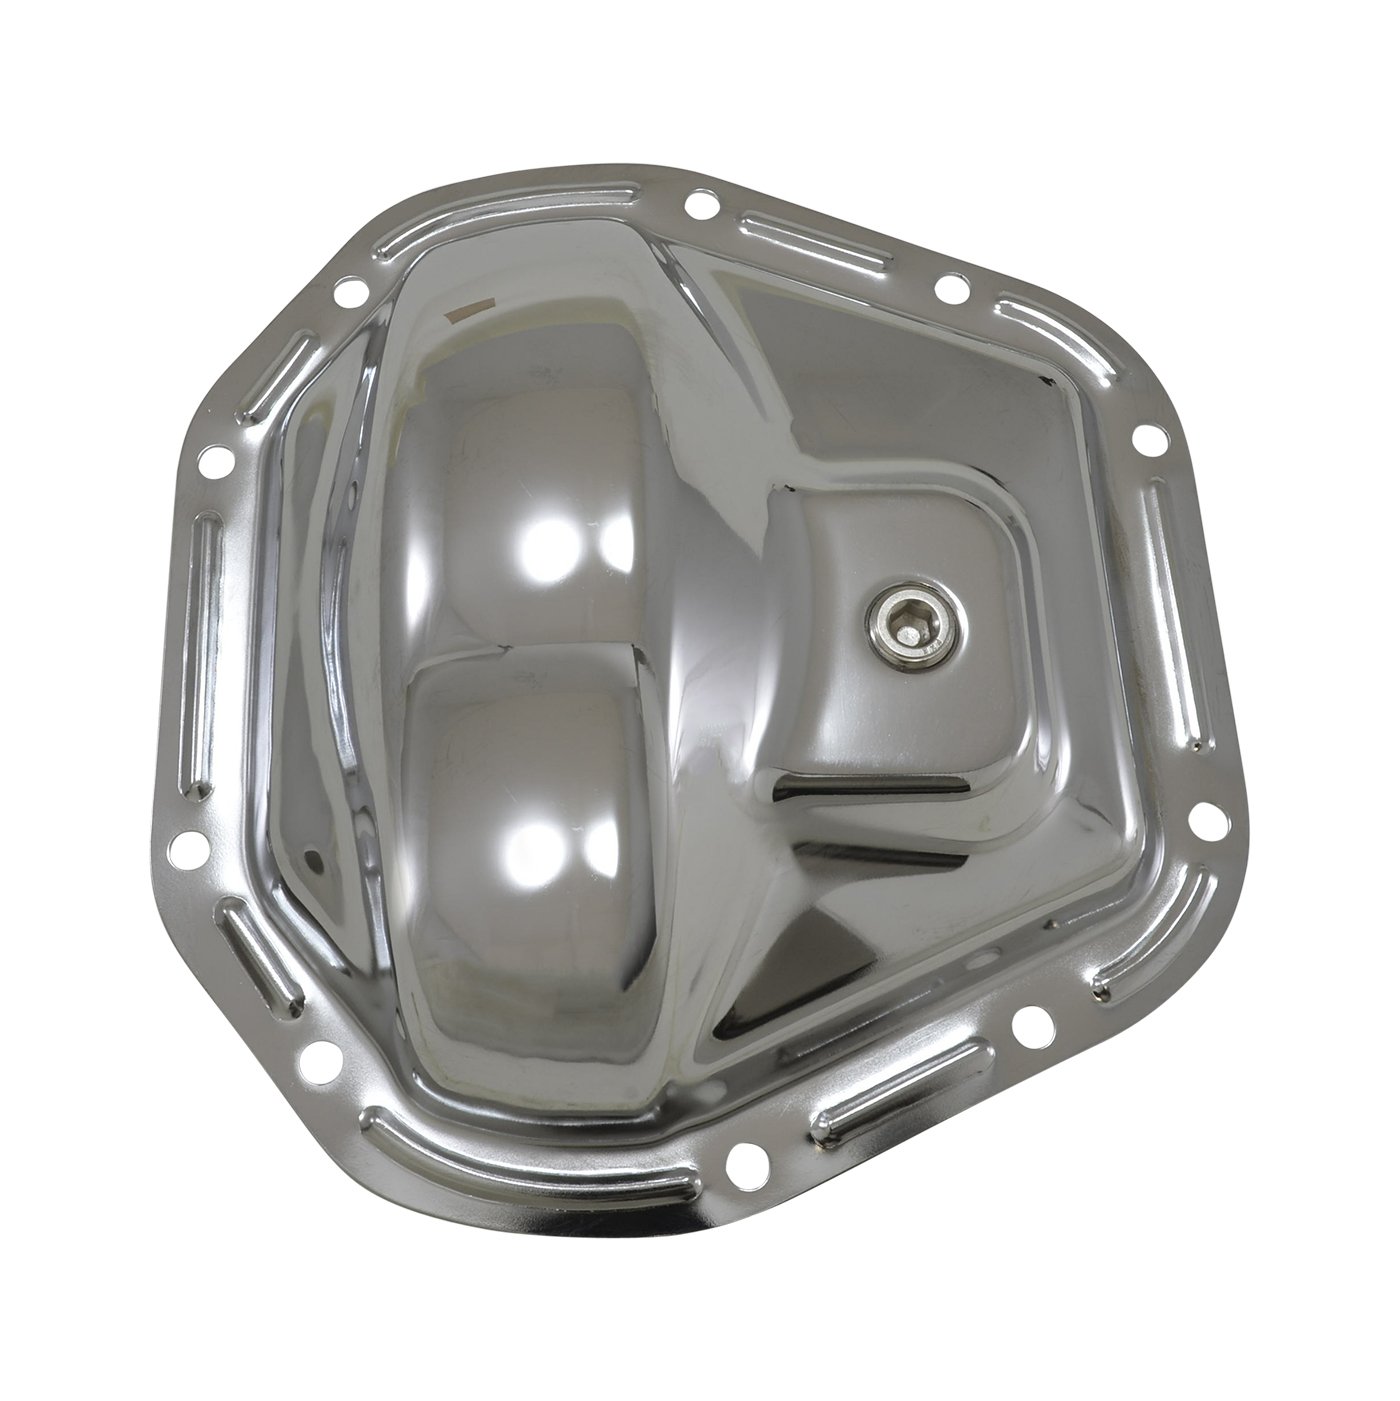 Differential Cover Fits Dana 60 and 61 Standard